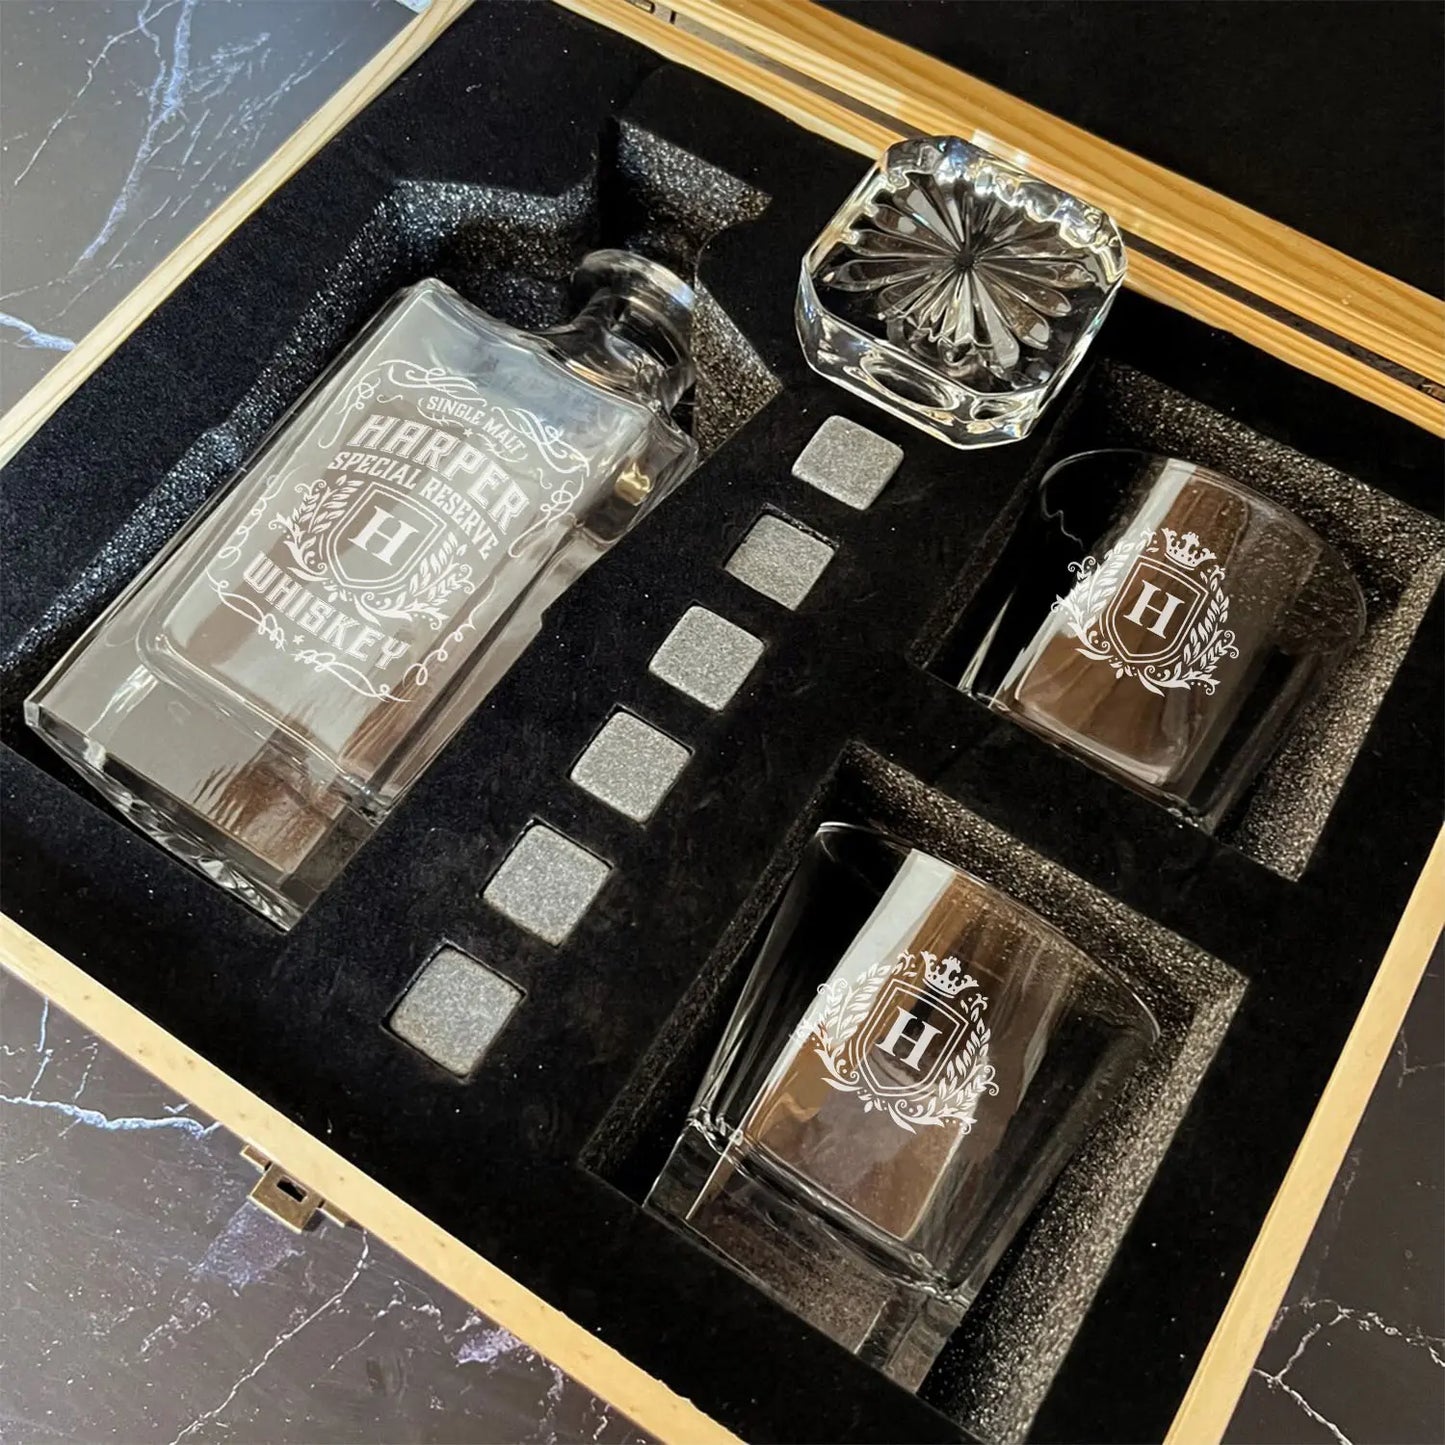 HARPER A01 Personalized Decanter Set wooden box and Ice 9